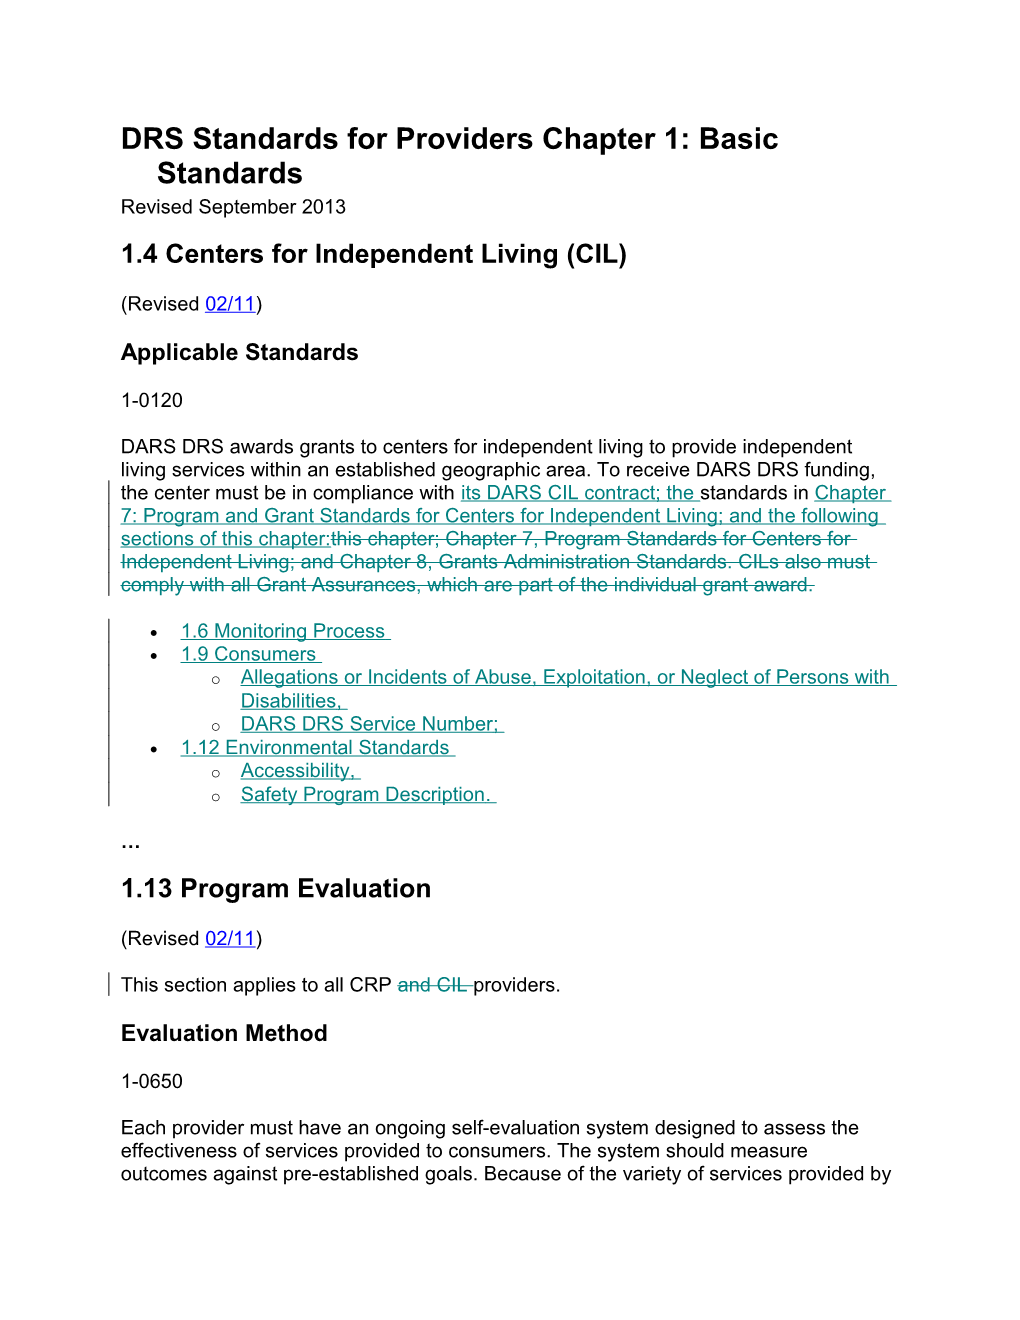 DRS Standards for Providers Revisions, September 2013